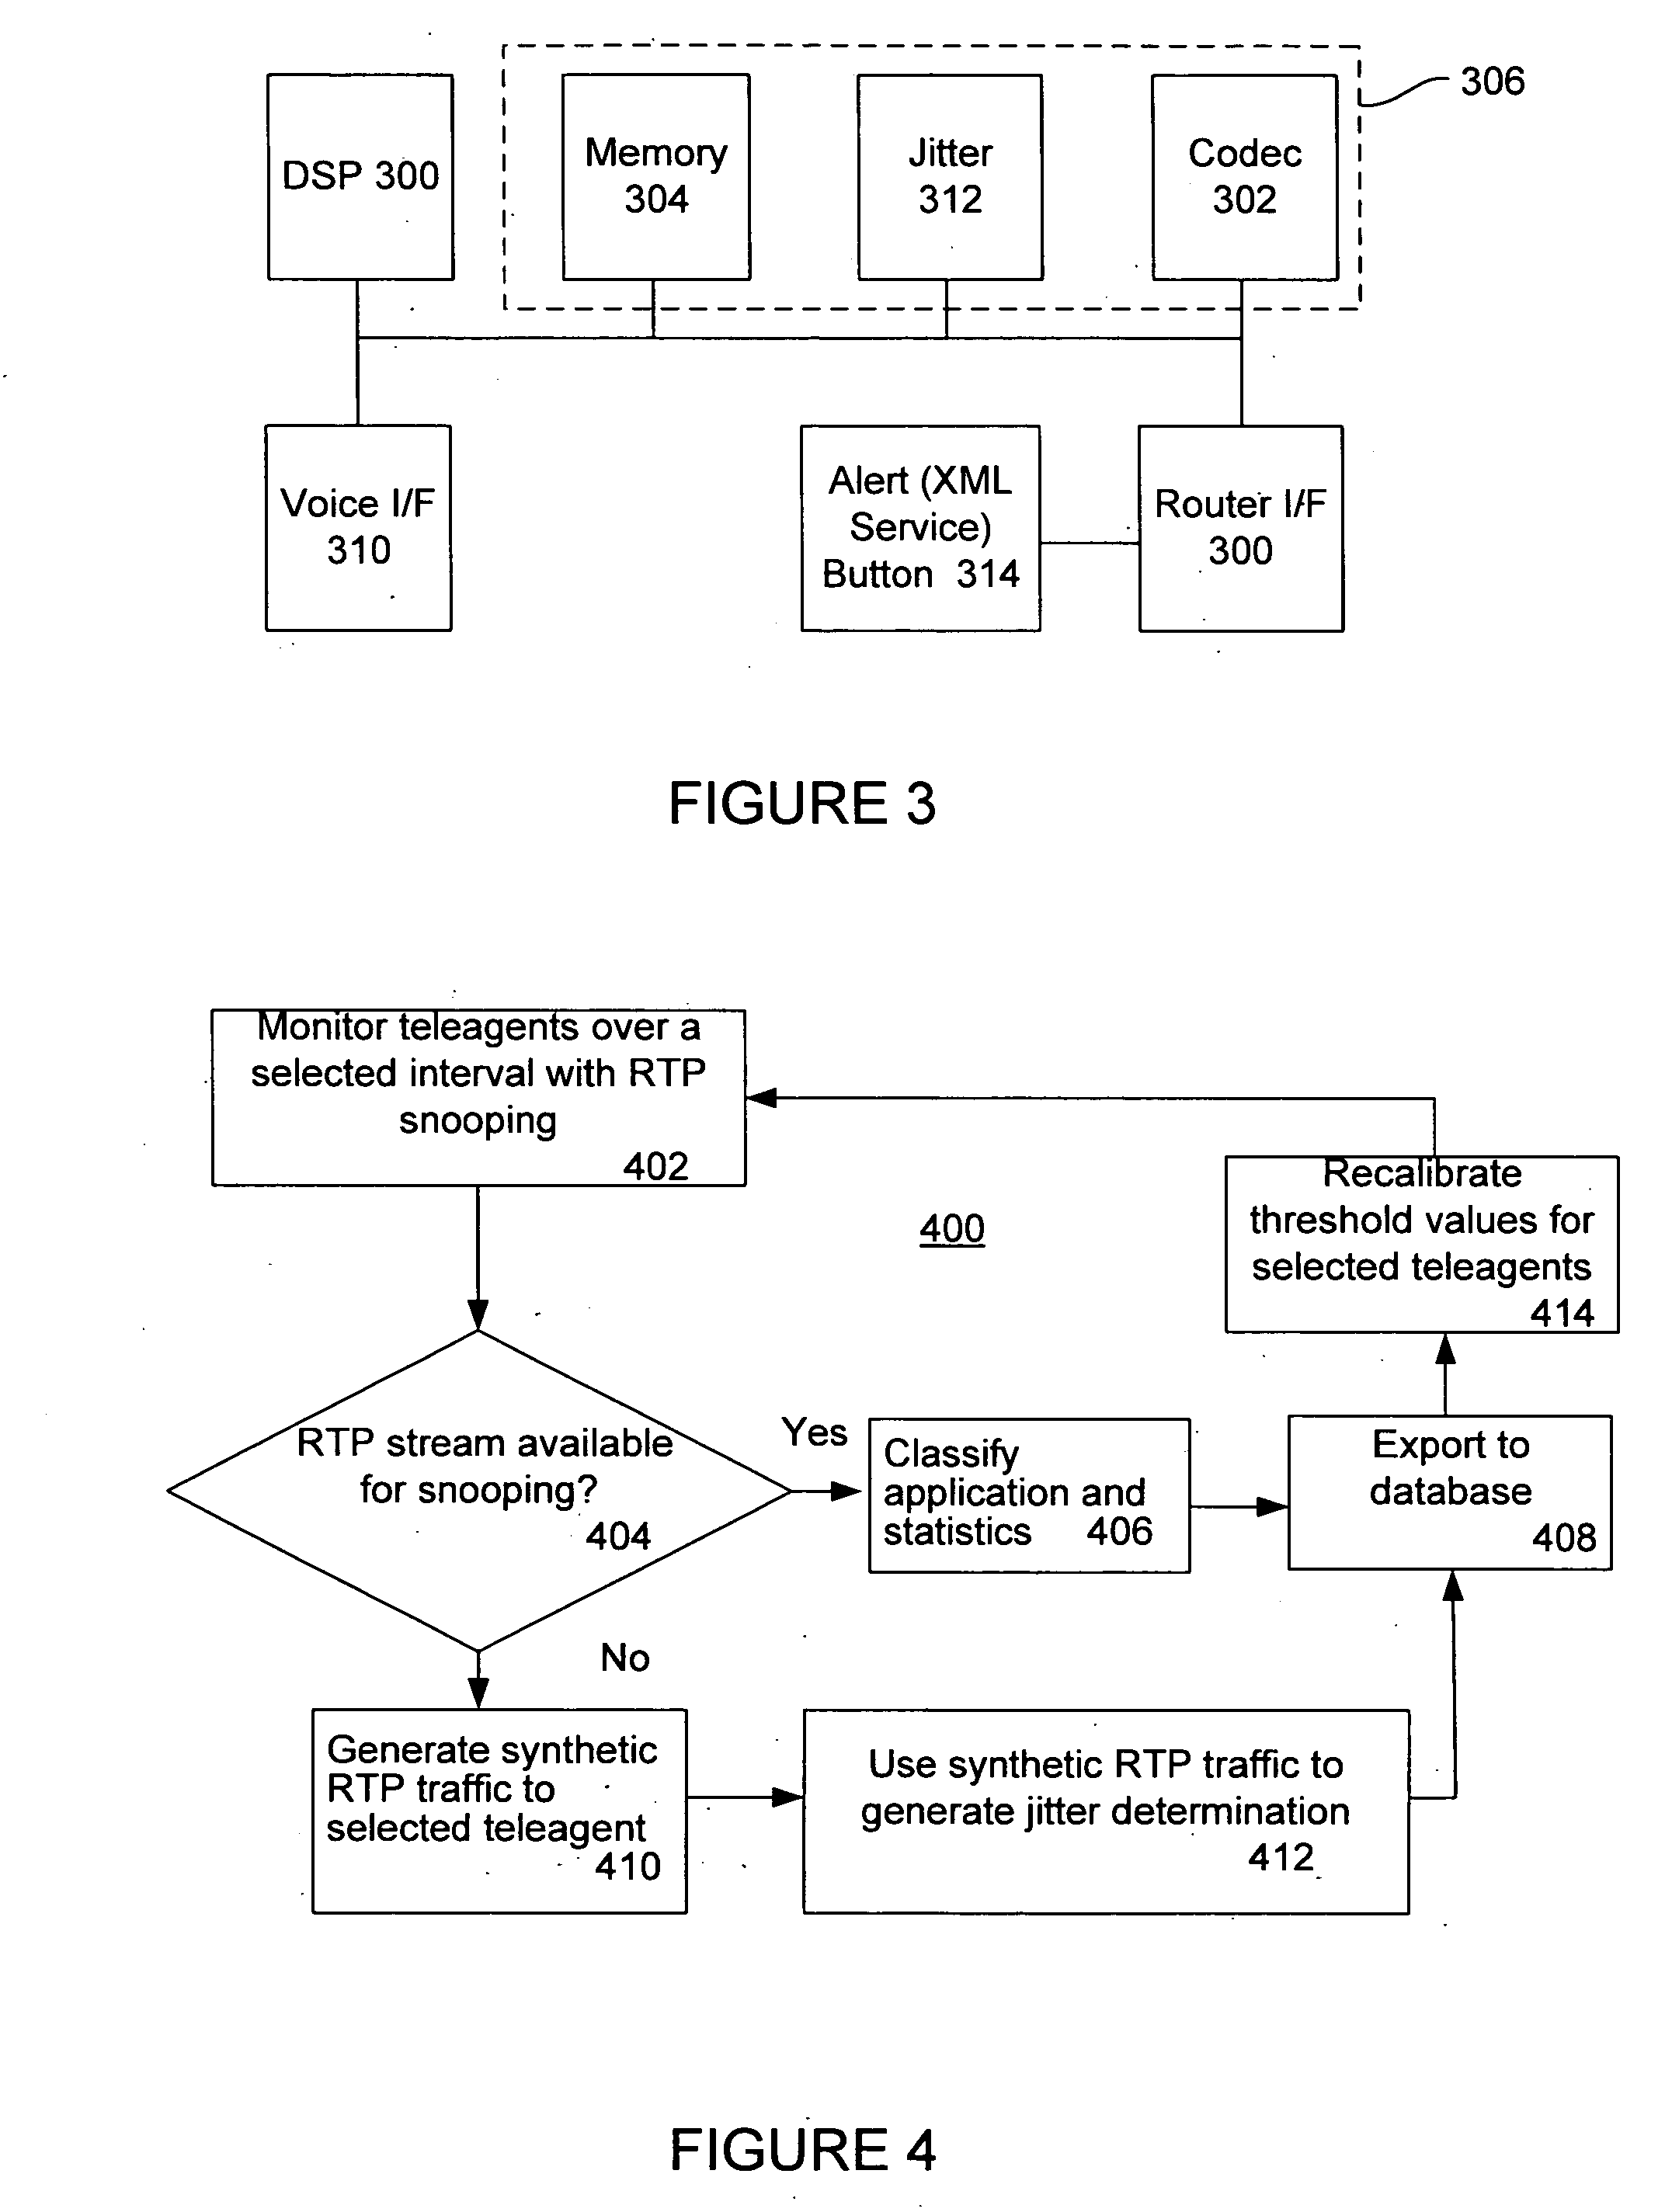 Method for managing the quality of encrypted voice over IP to teleagents